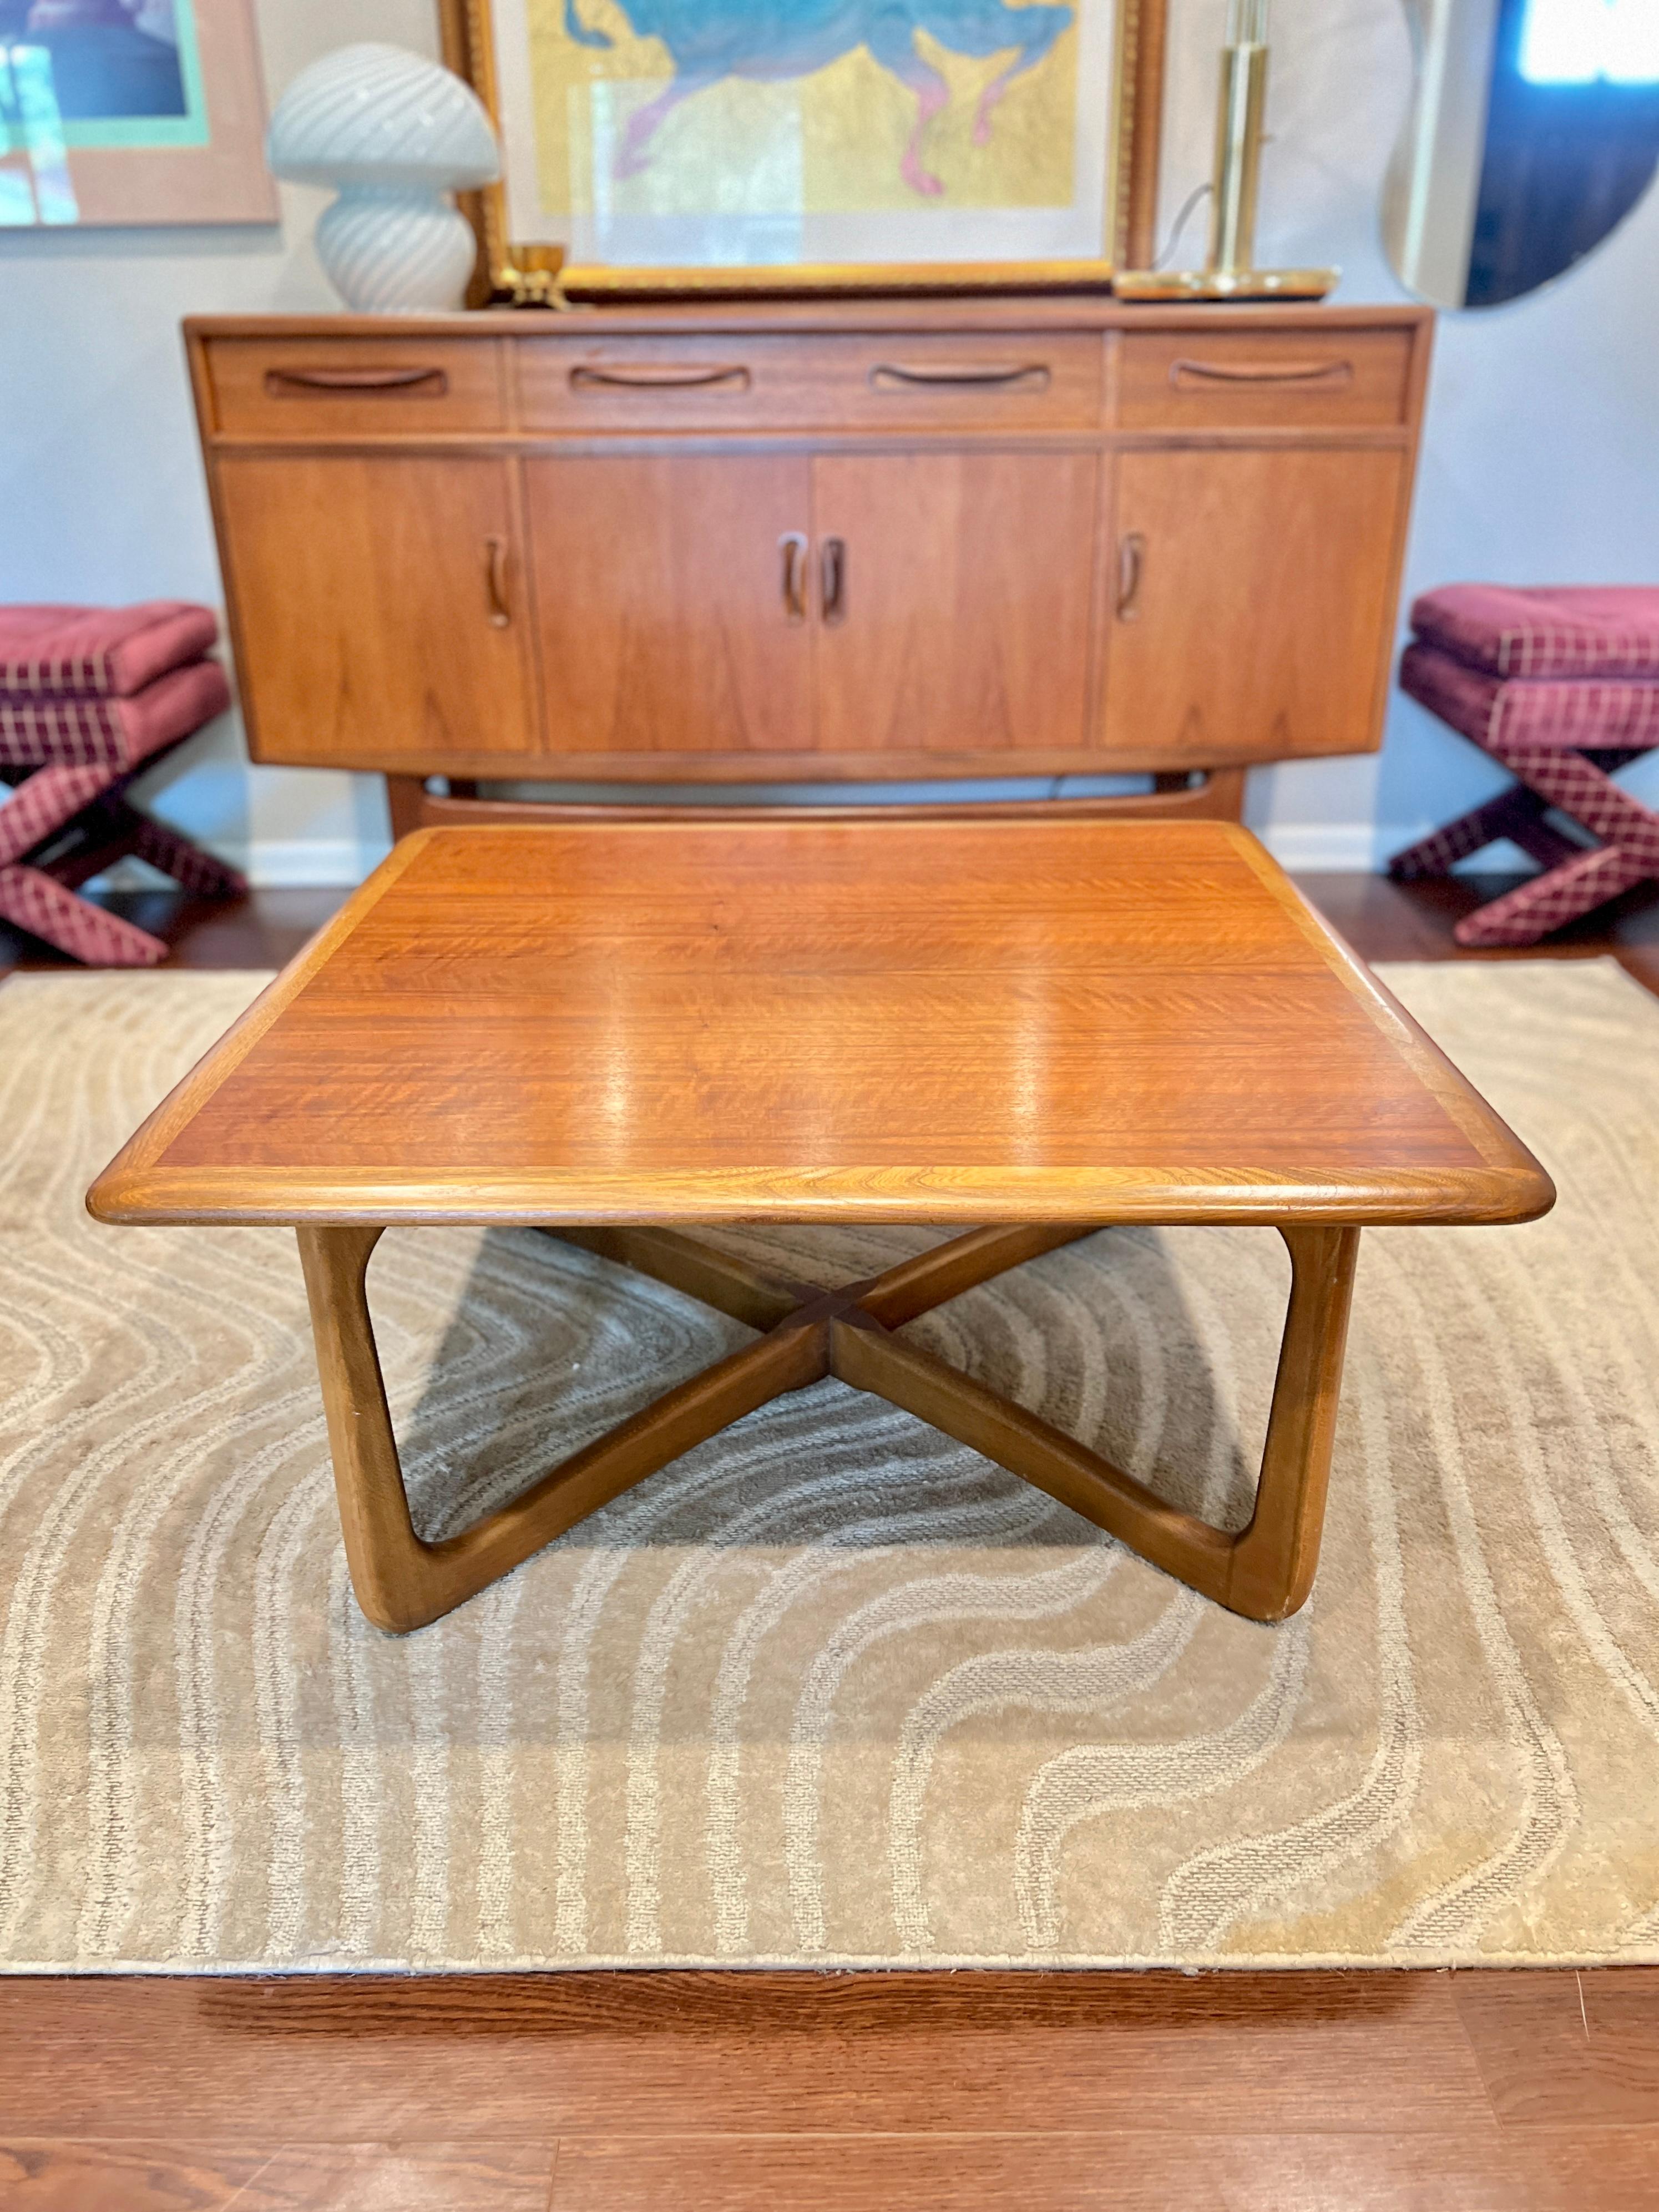 Mid-20th Century A mid century modern oak coffee table by Lane. Part of perception collection 